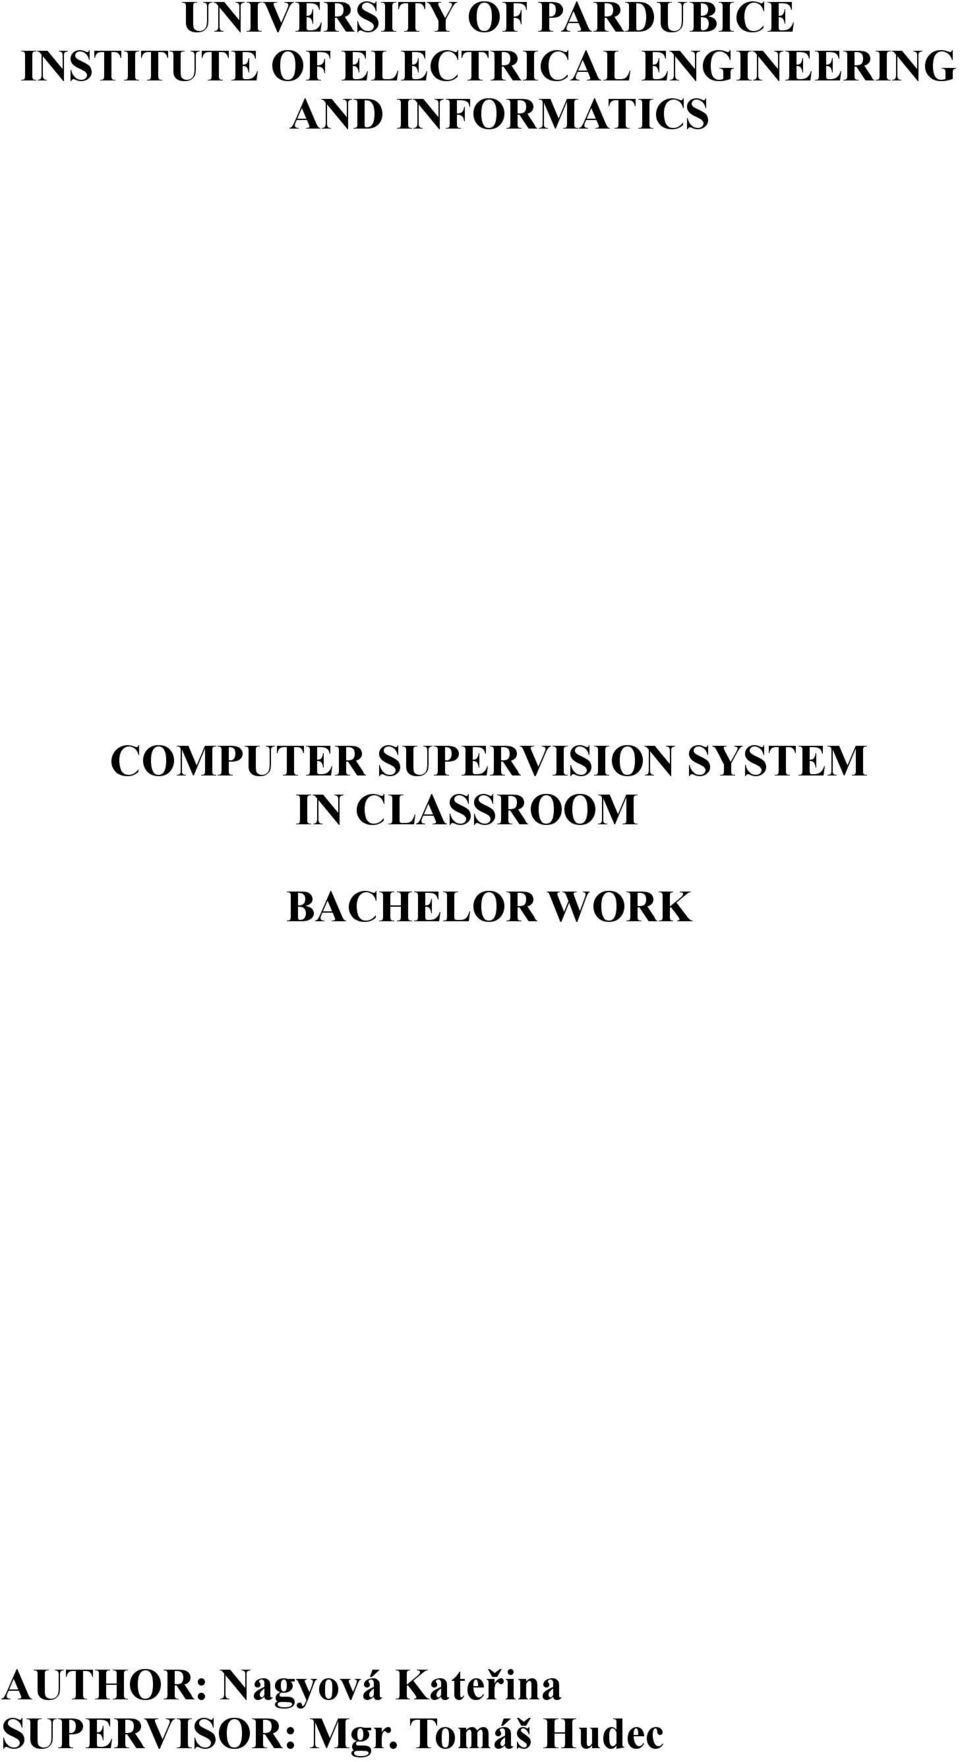 COMPUTER SUPERVISION SYSTEM IN CLASSROOM